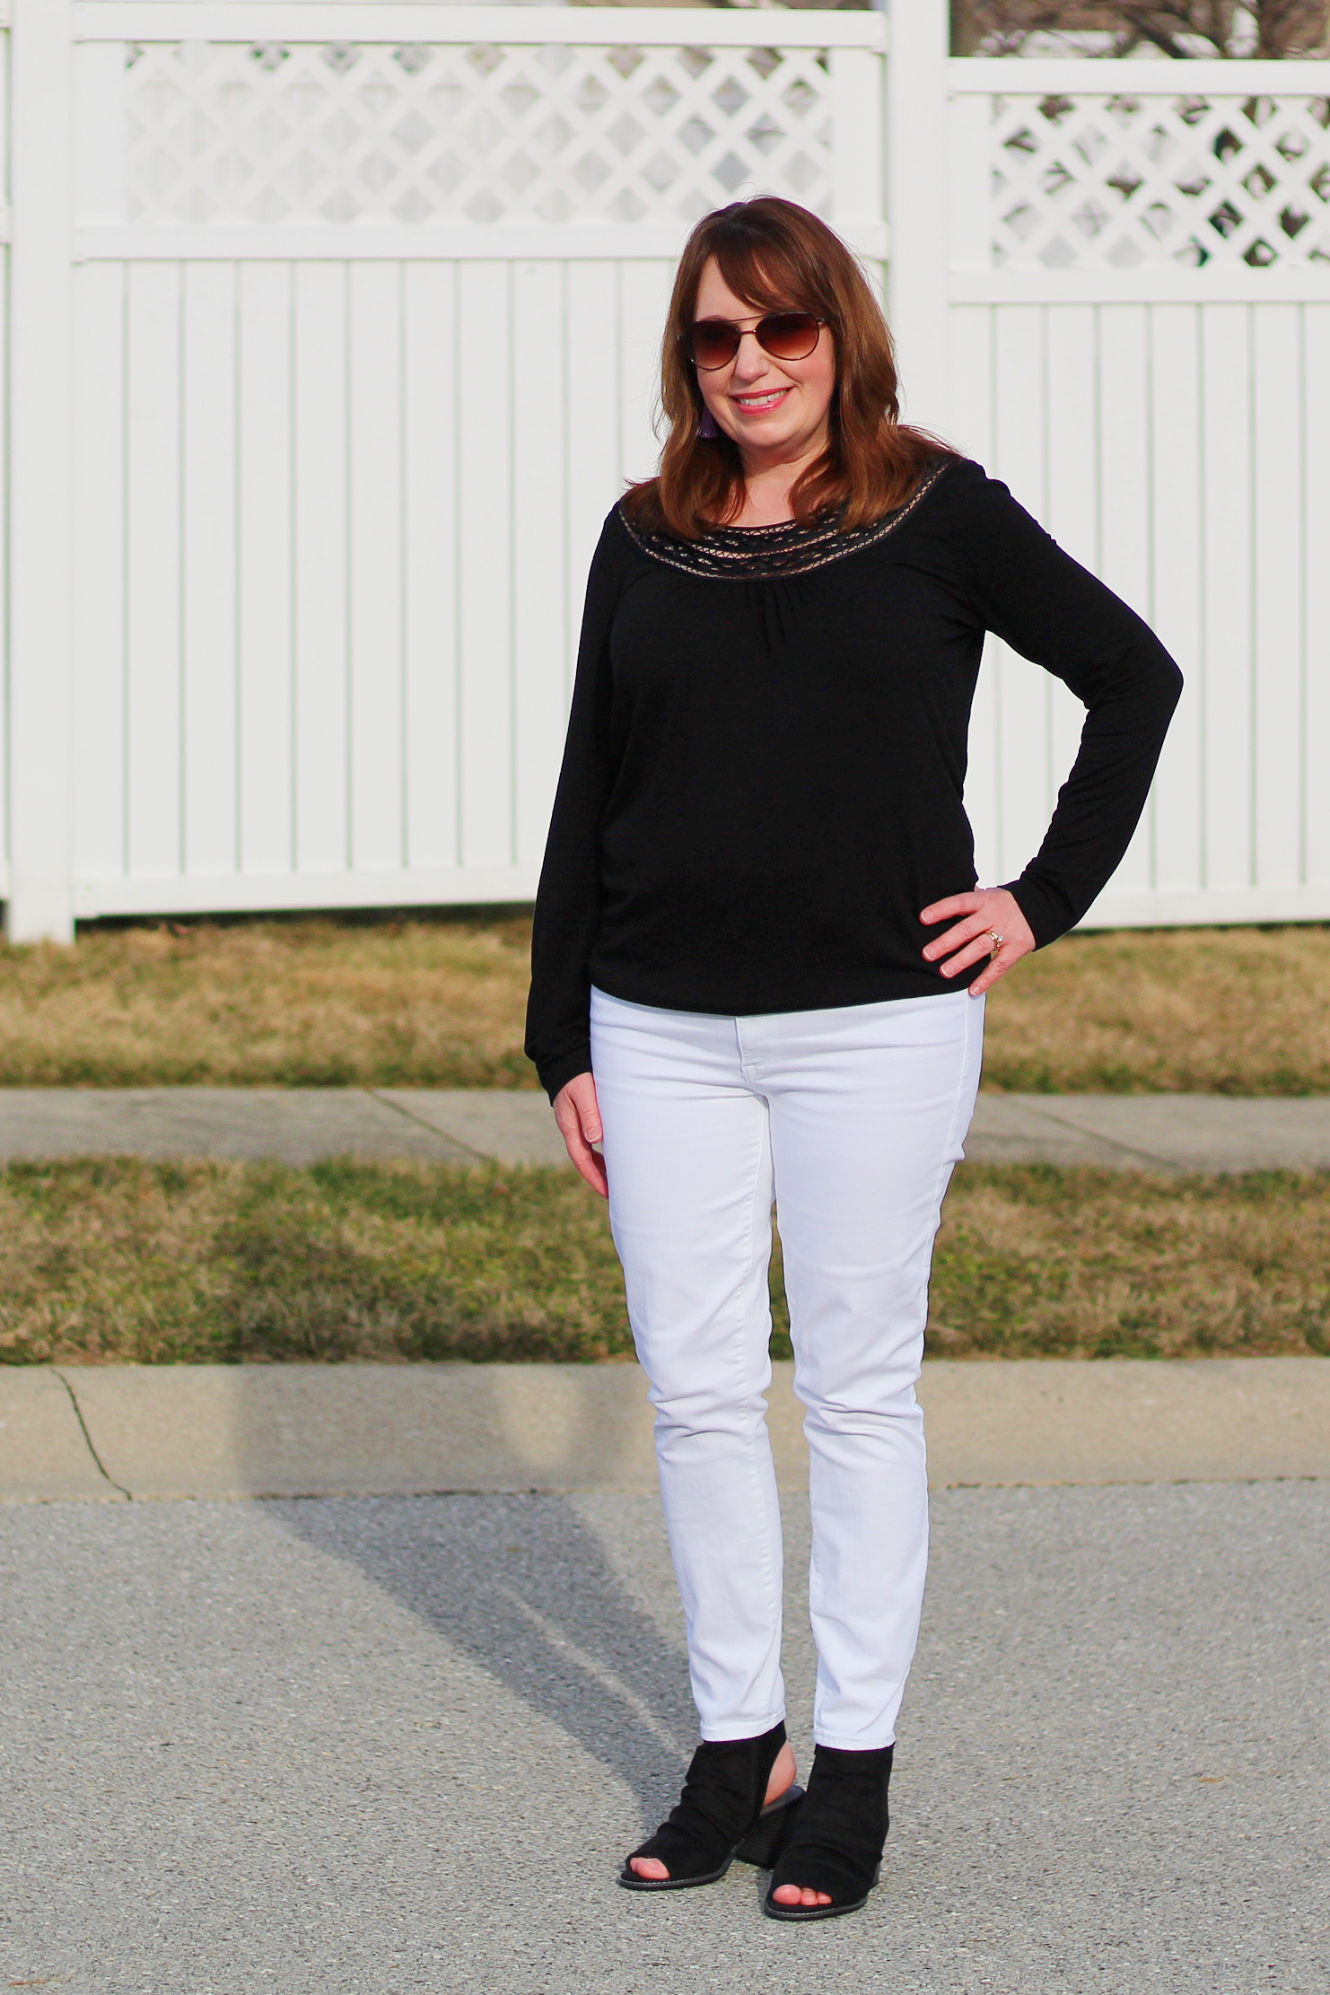 Classic Black And White Outfit/Spring Outfit